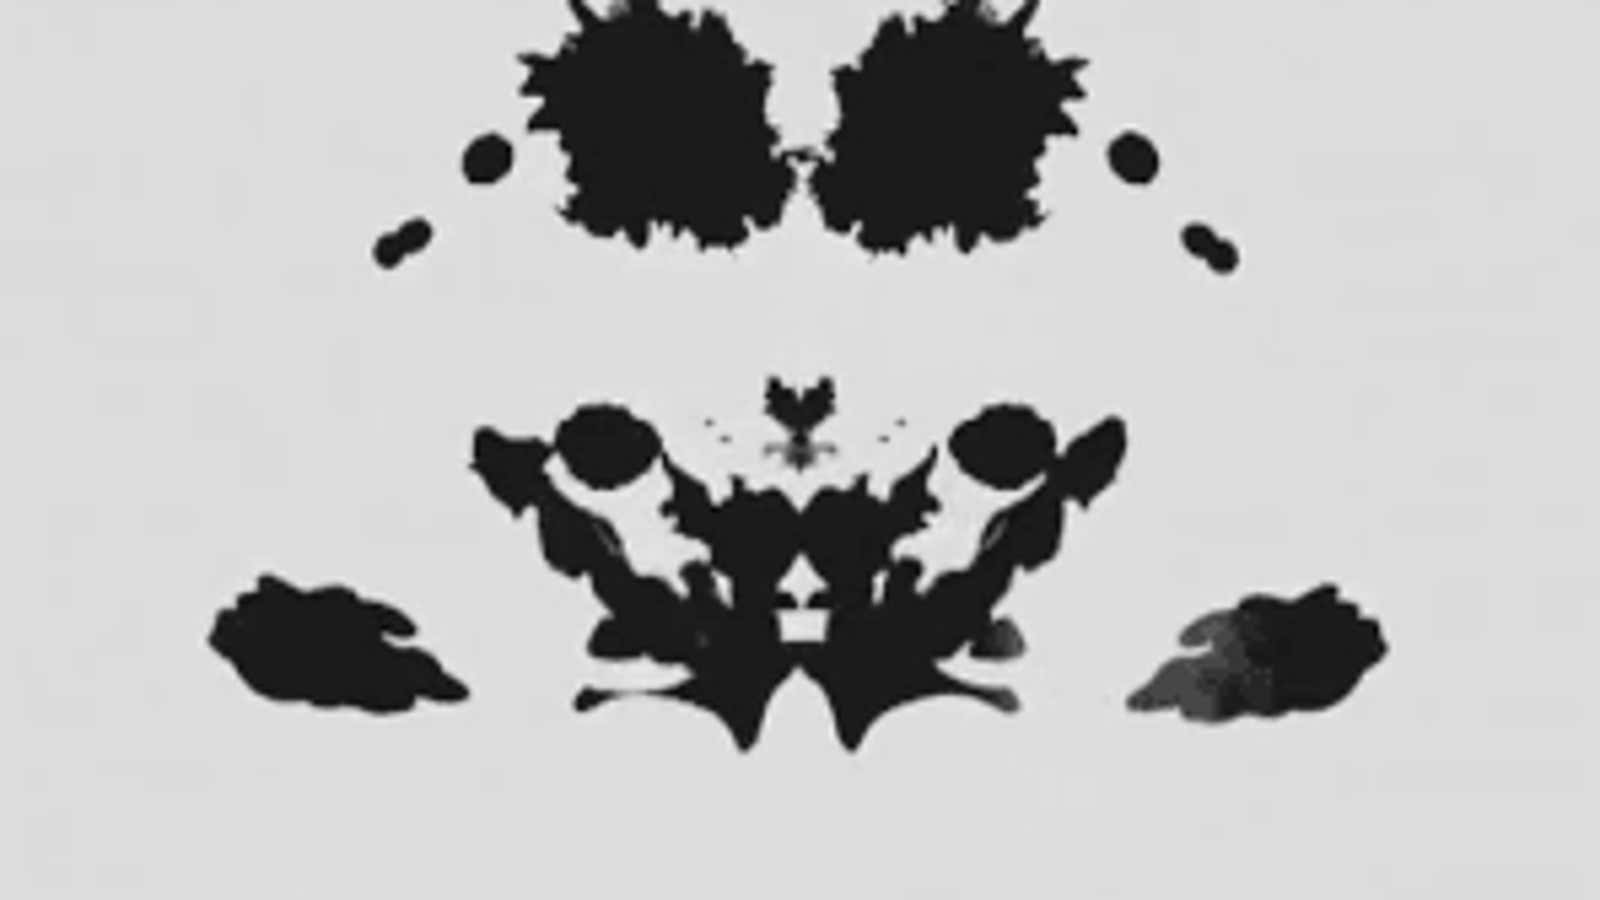 History of the Rorschach Test